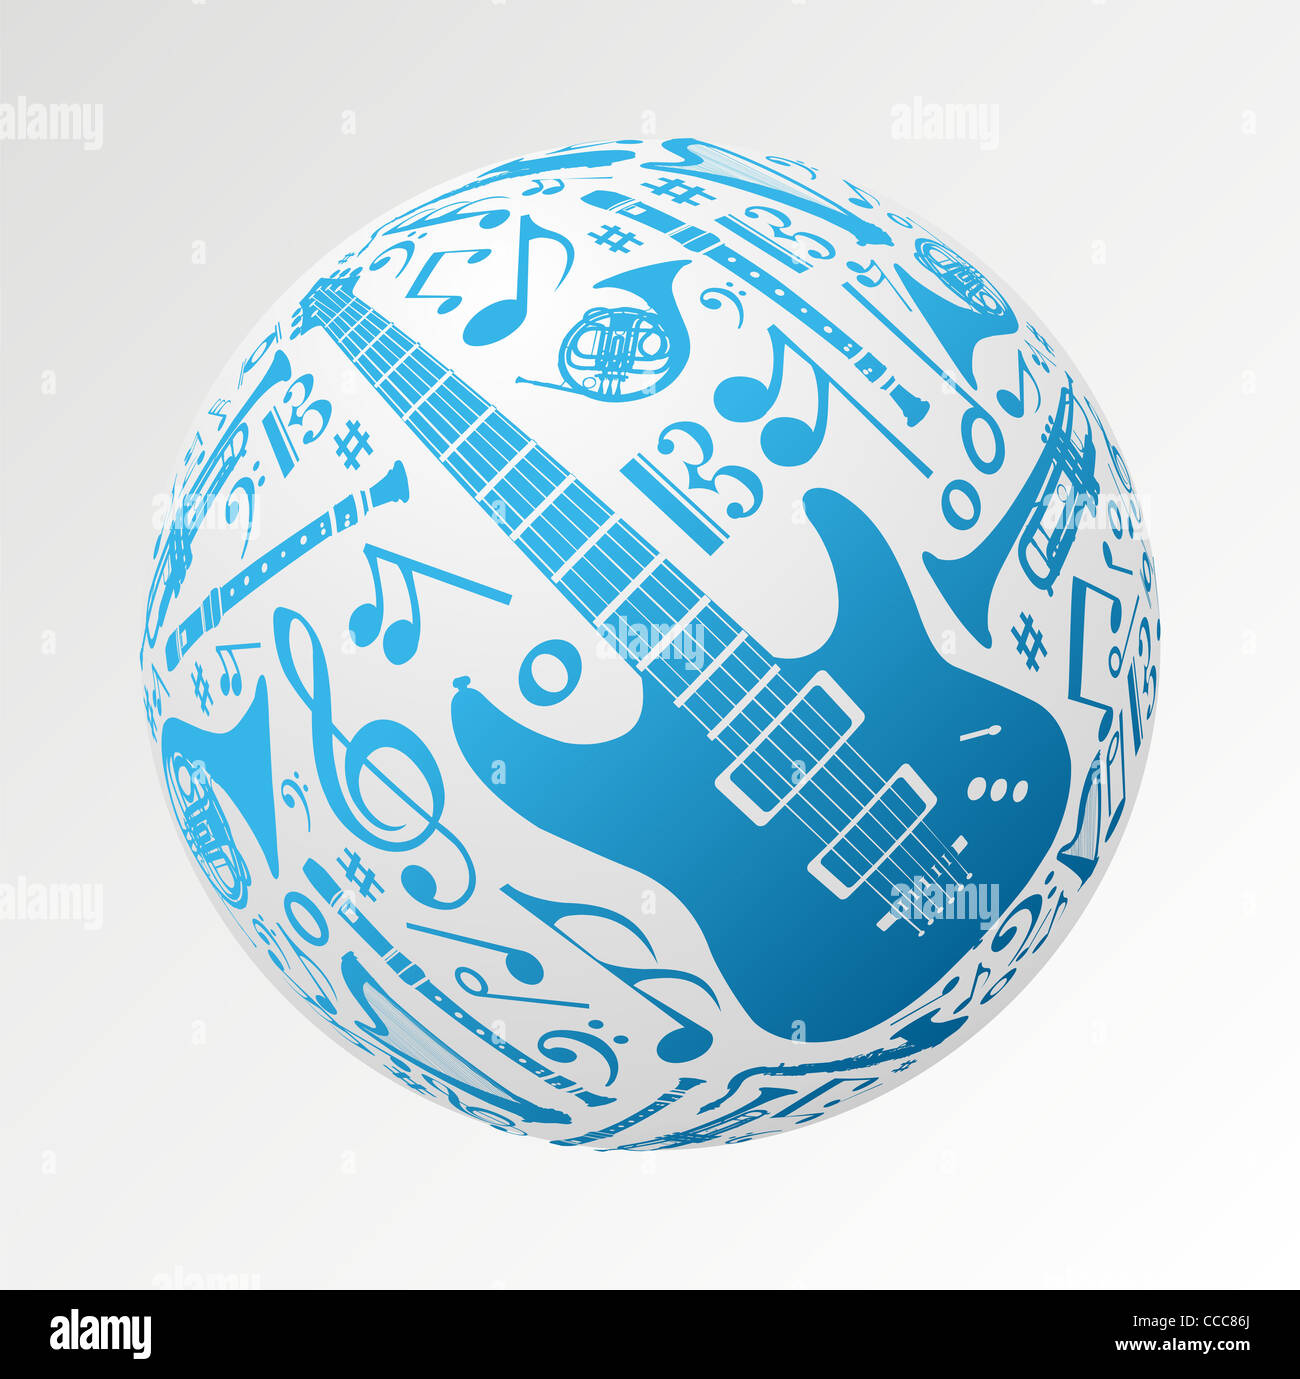 Love for music concept illustration. Music instruments set in sphere ball shape background. Vector file available. Stock Photo